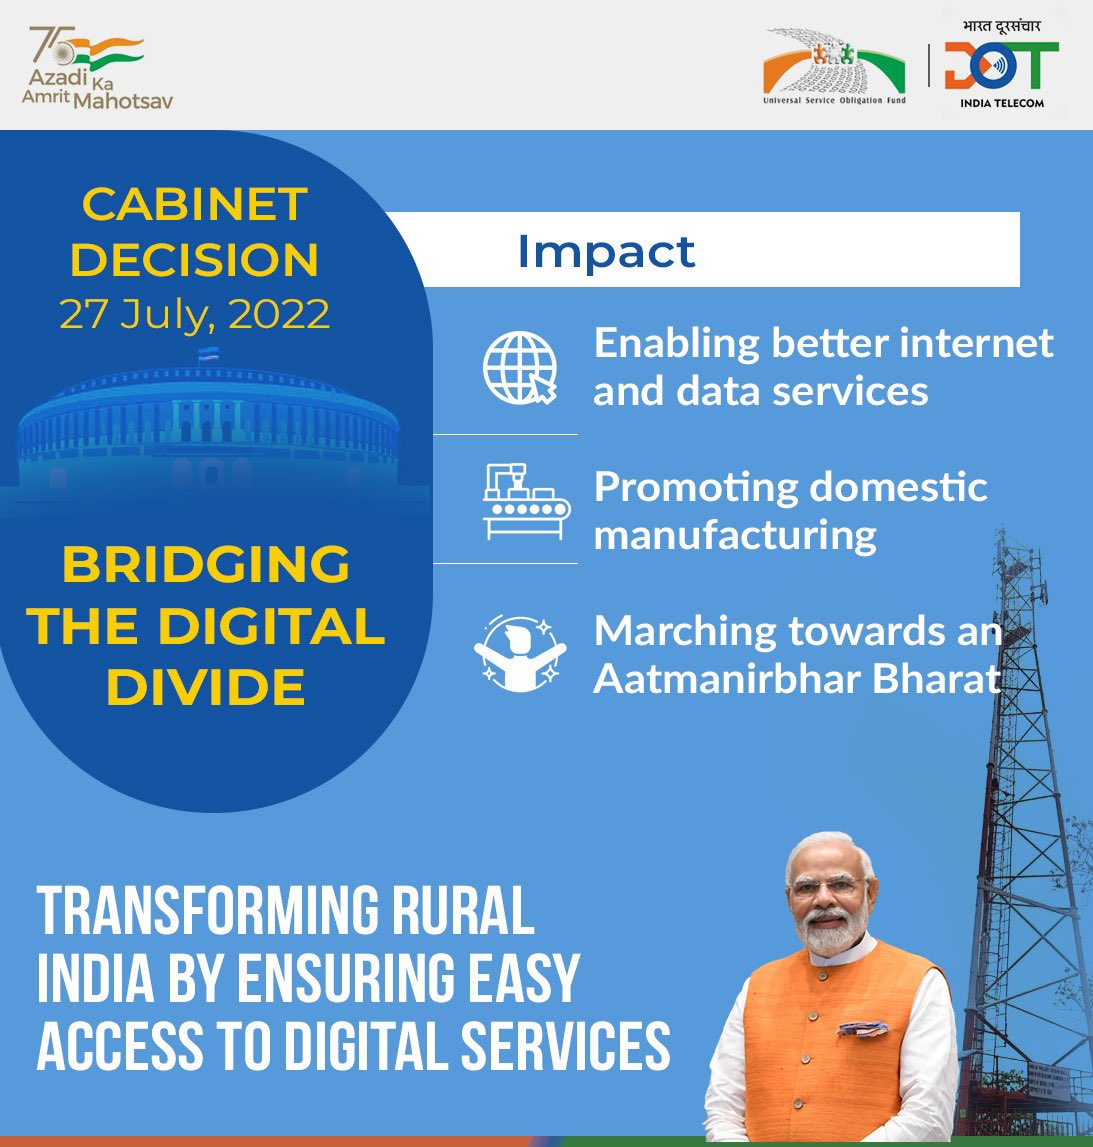 Transforming rural India, providing easy access to digital services